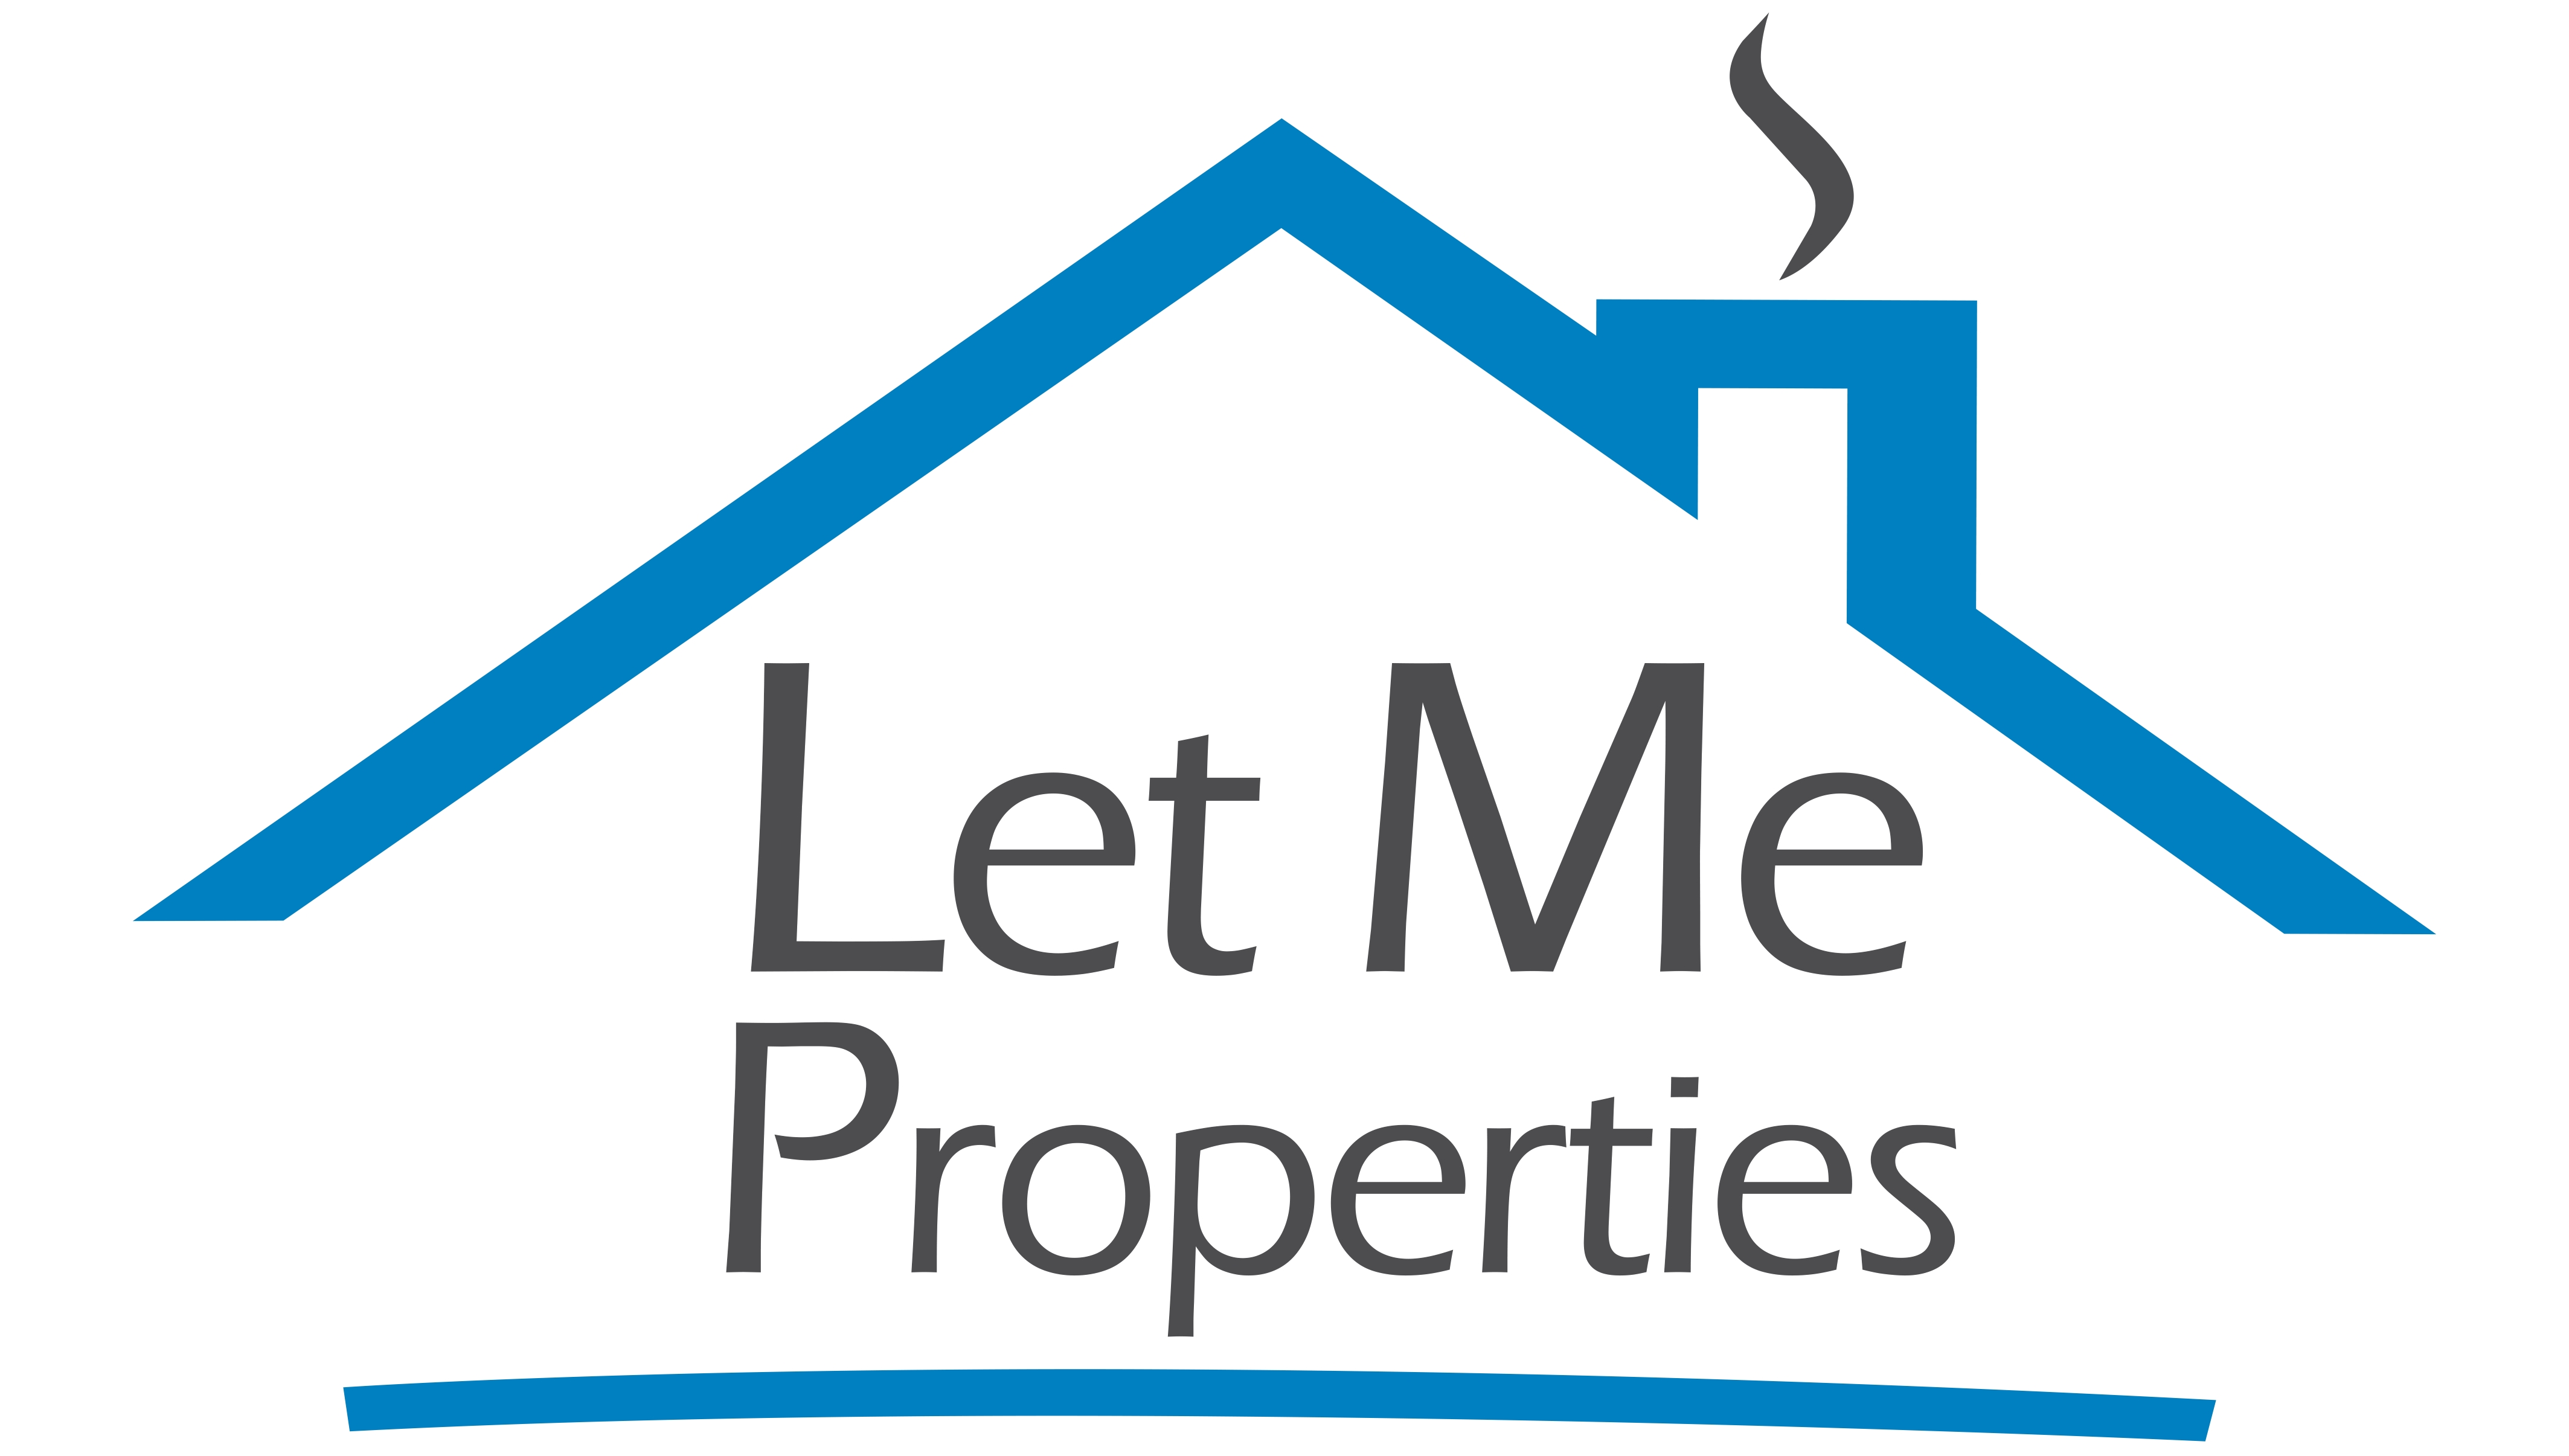 Let Me Properties : Letting agents in Watford Hertfordshire